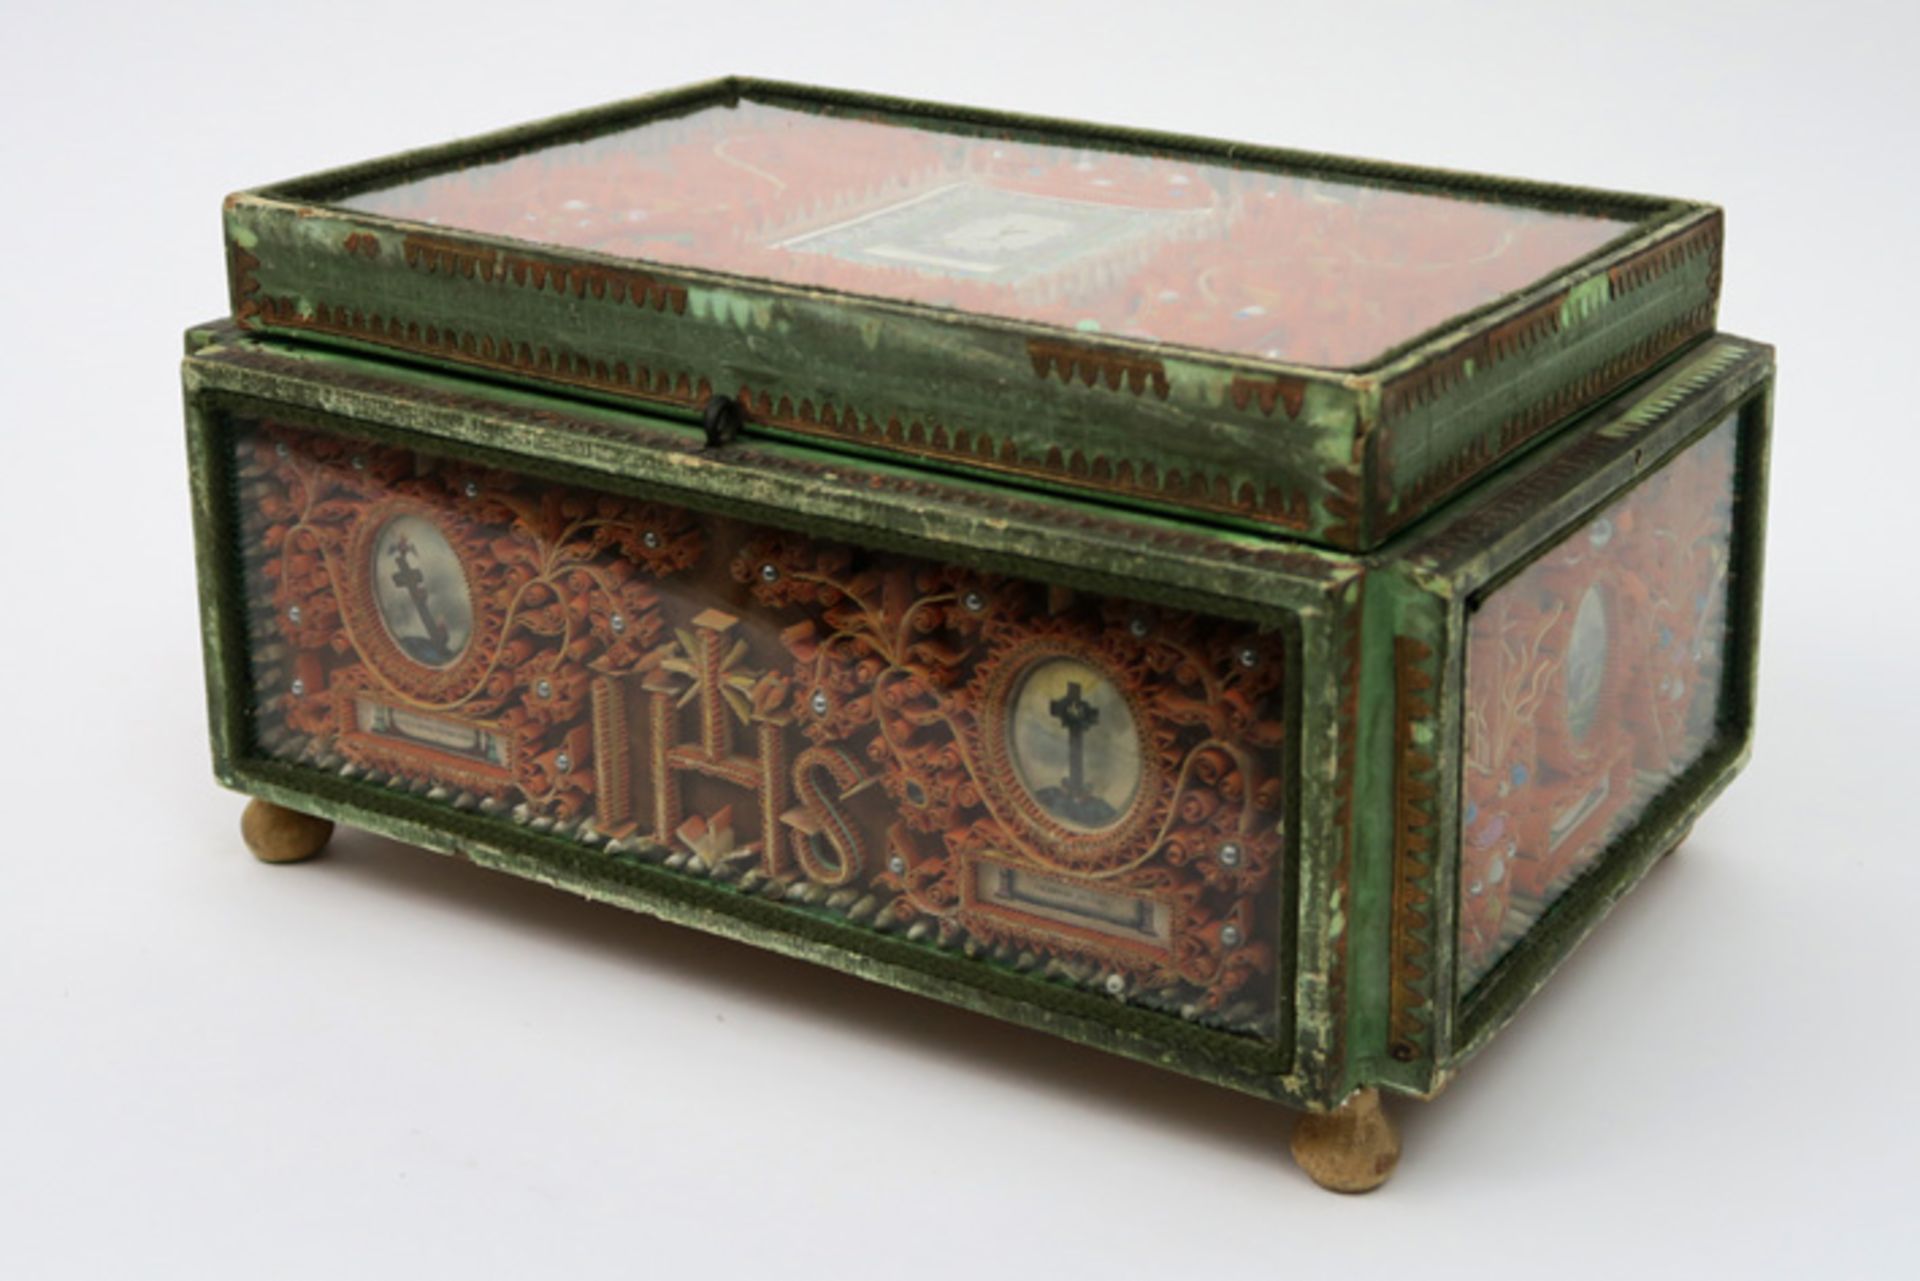 19th "Folk Art" box in painted wood and glass with relics VOLKSKUNST - 19° EEUW kistje in